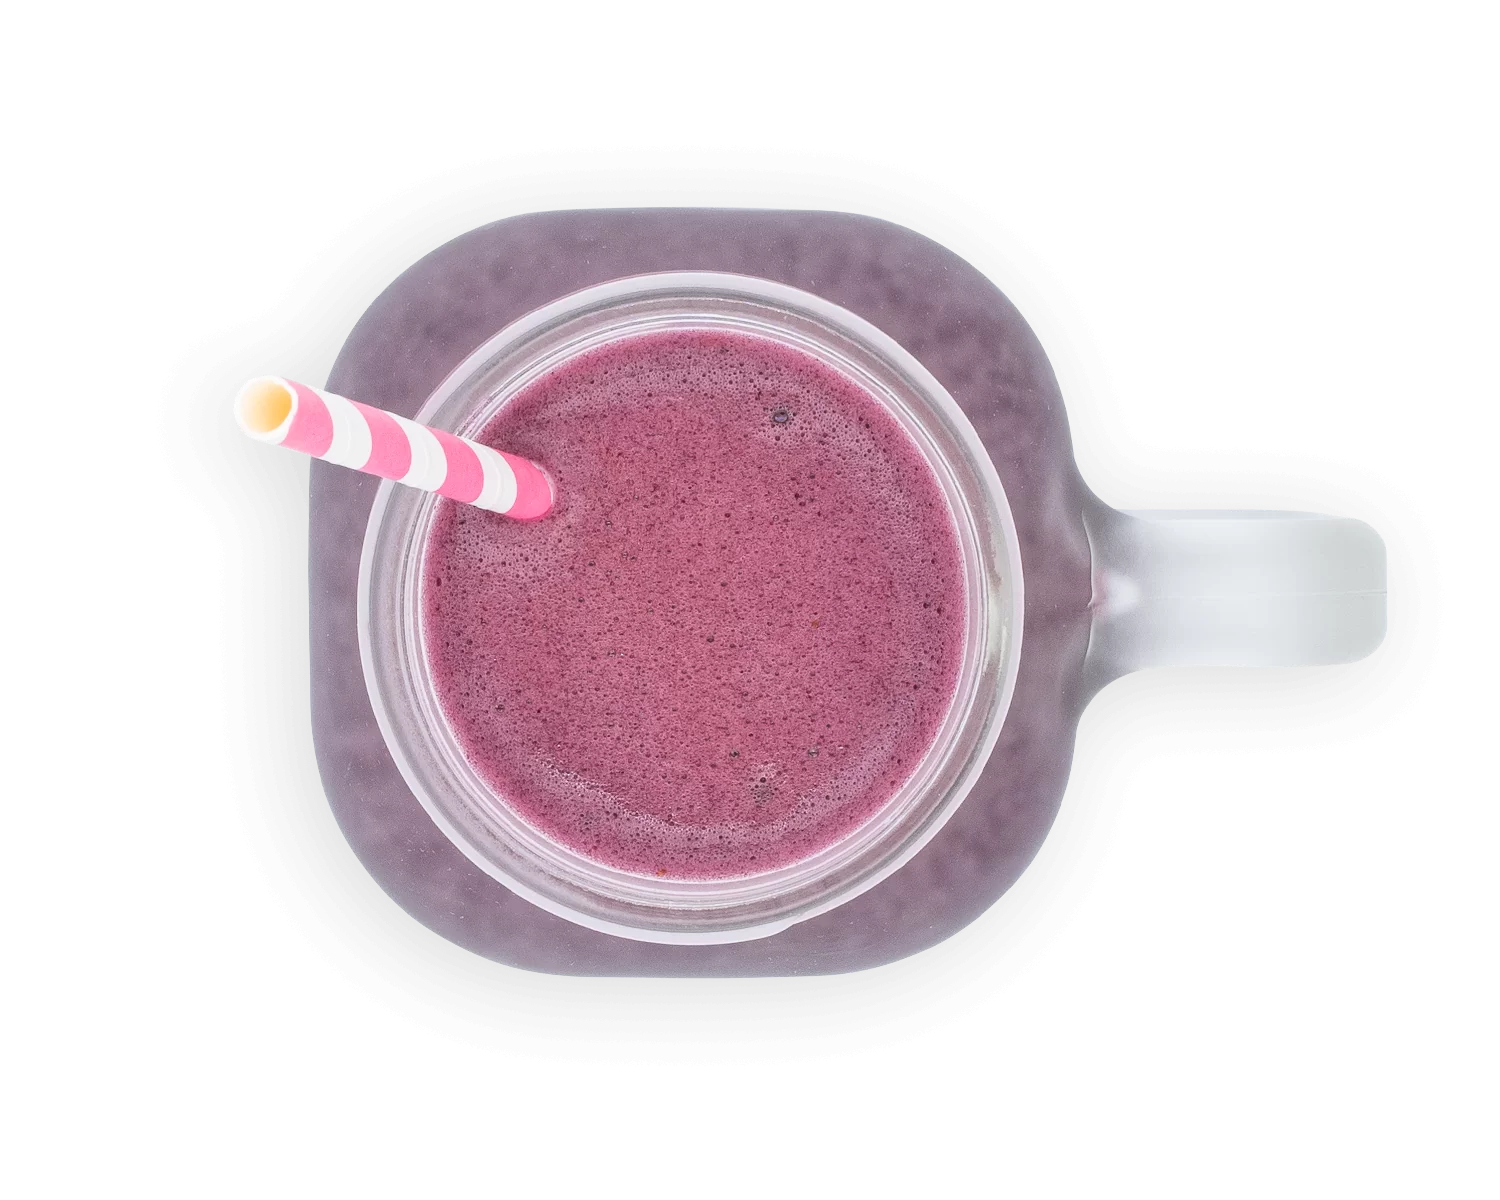 Diet Blueberry Raspberry shake – with added blueberries